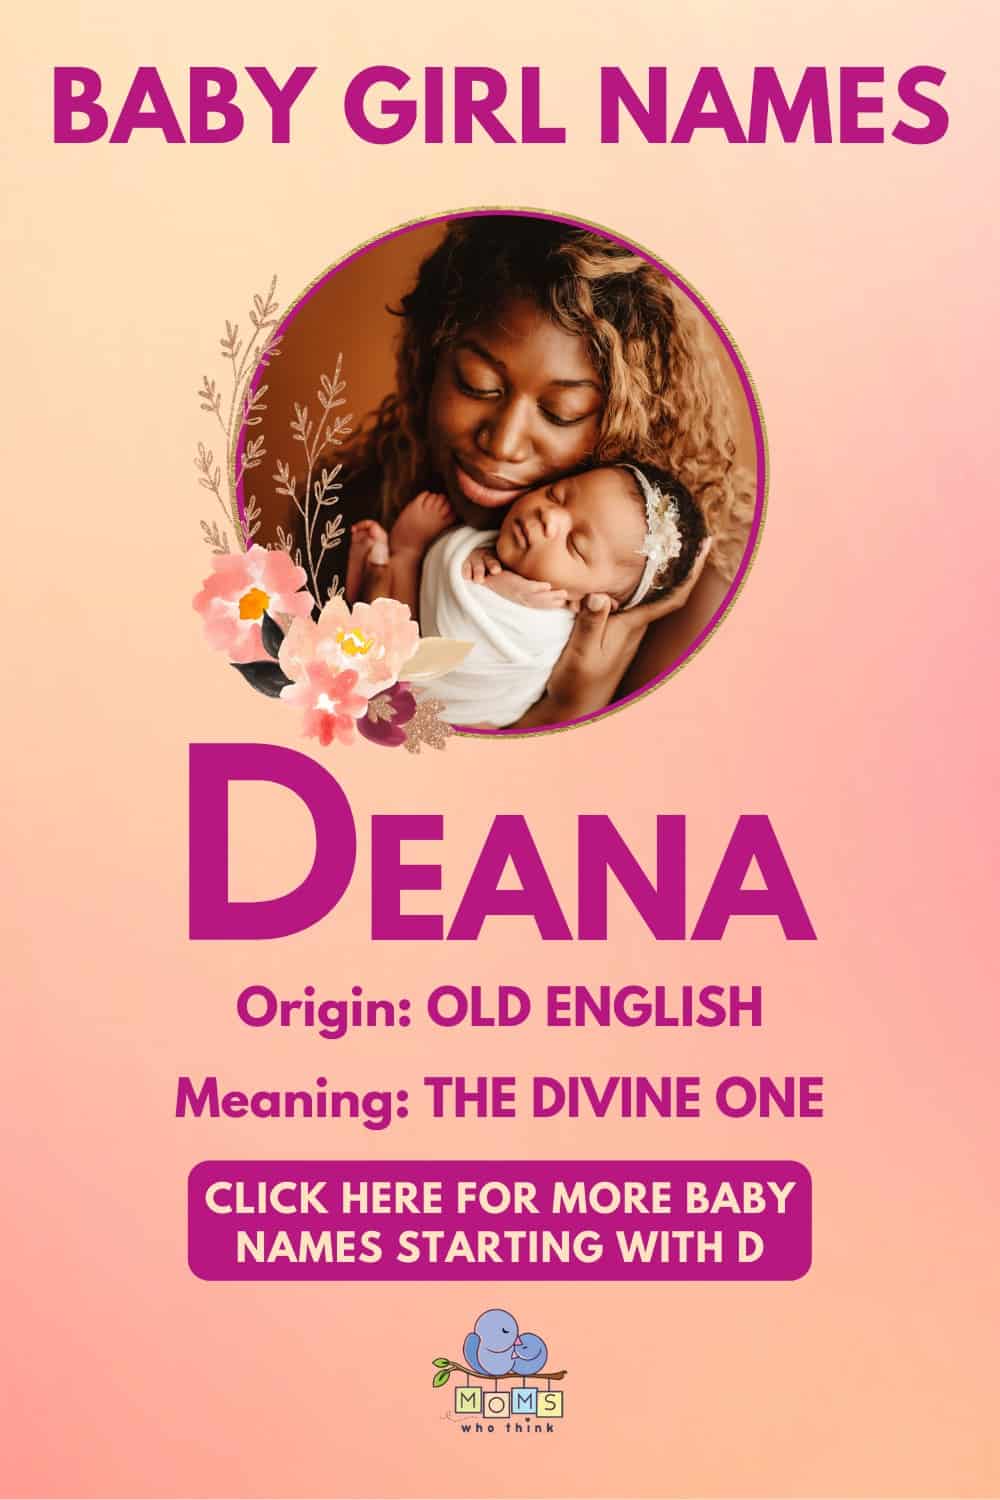 Baby girl name meanings - Deana